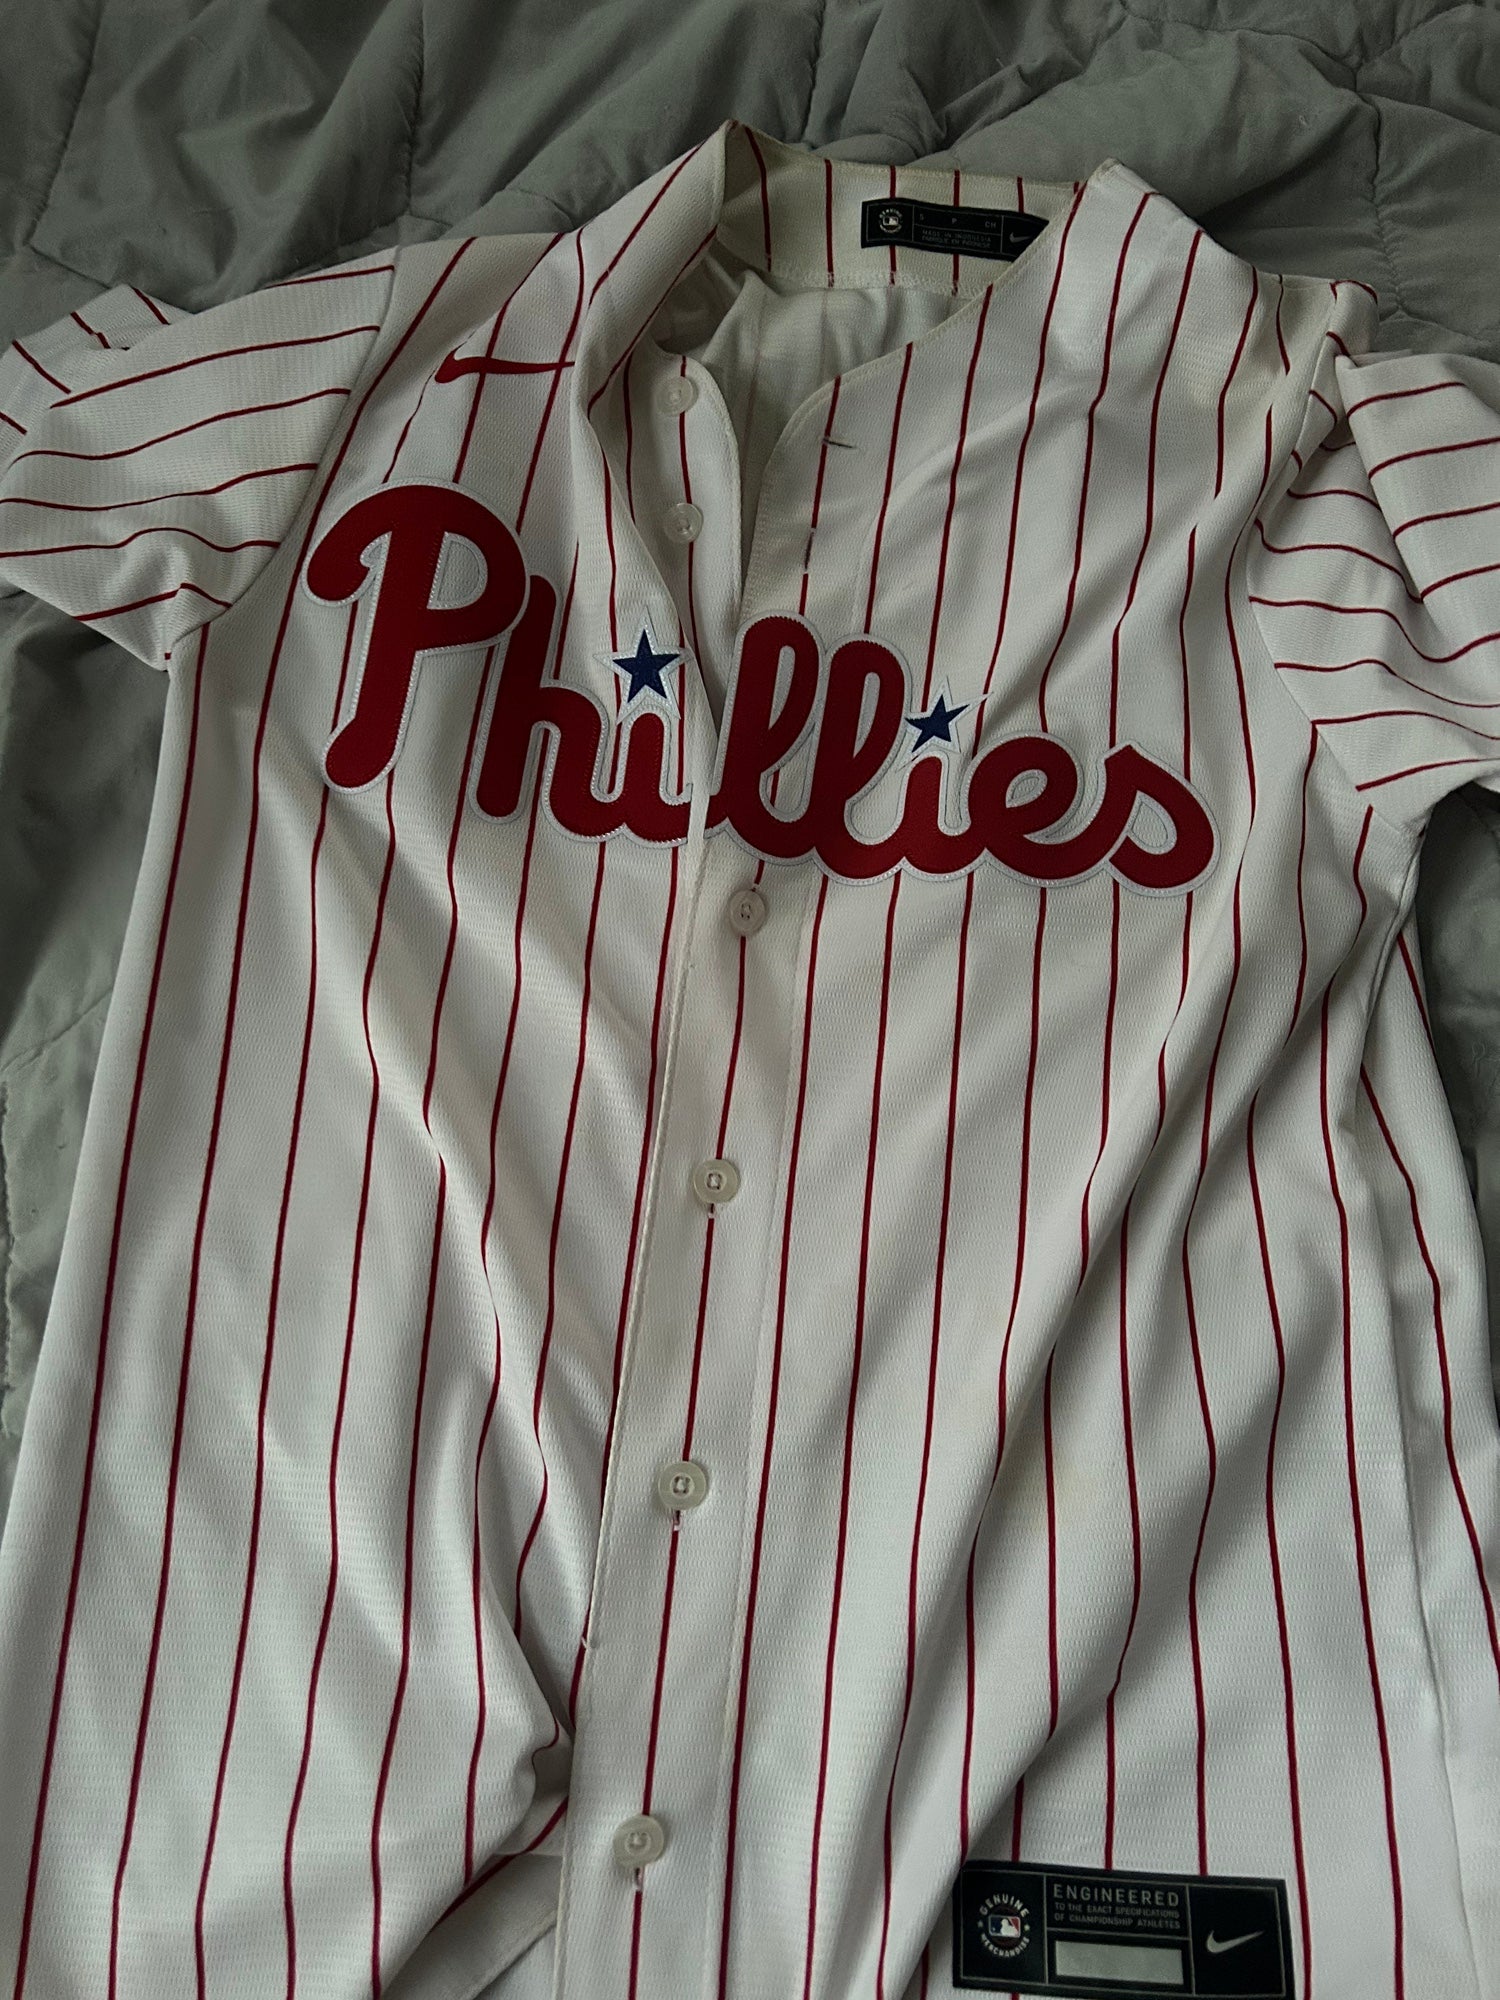 2018 Japan Series Game-Used Jersey - Rhys Hoskins - Size 48